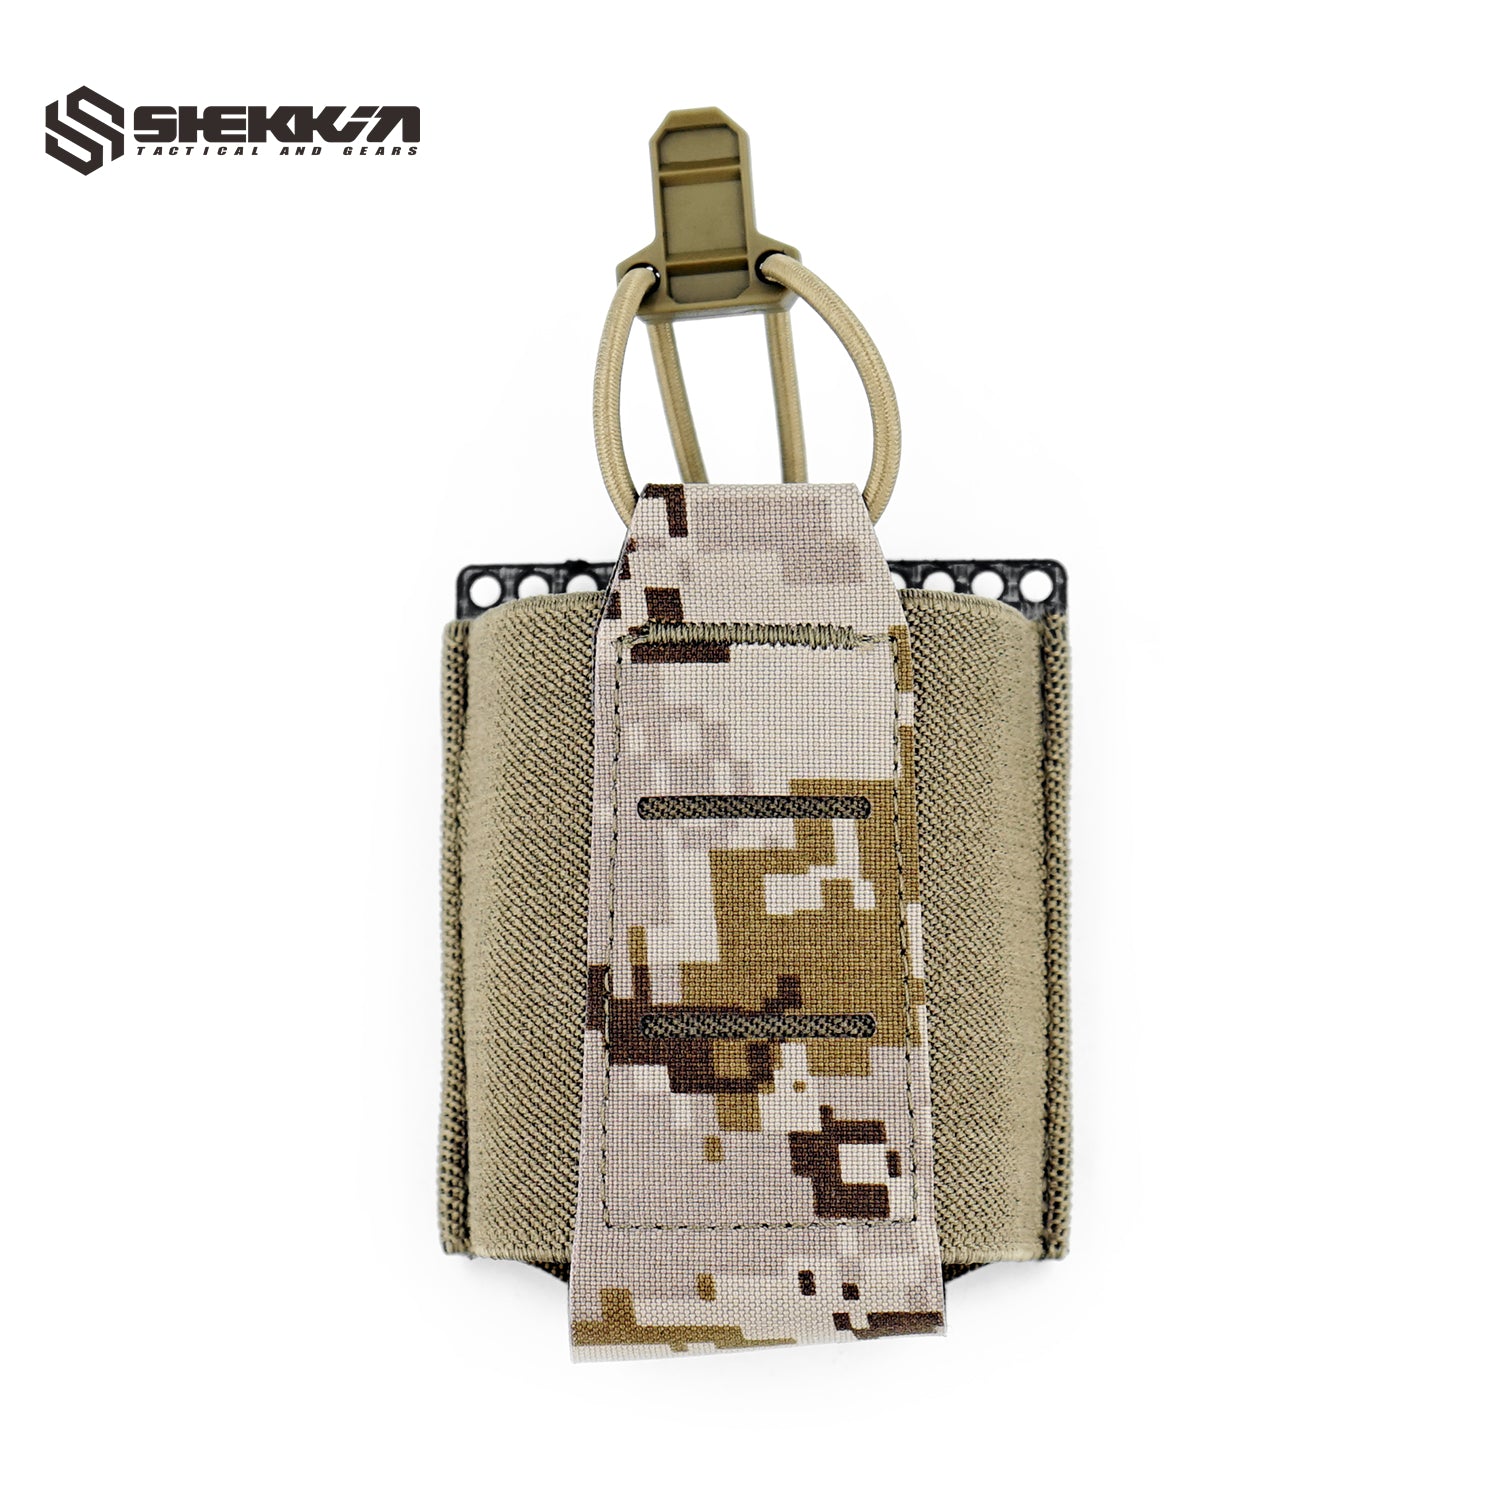 Single 556 m4 mag pouch with Tegris plate